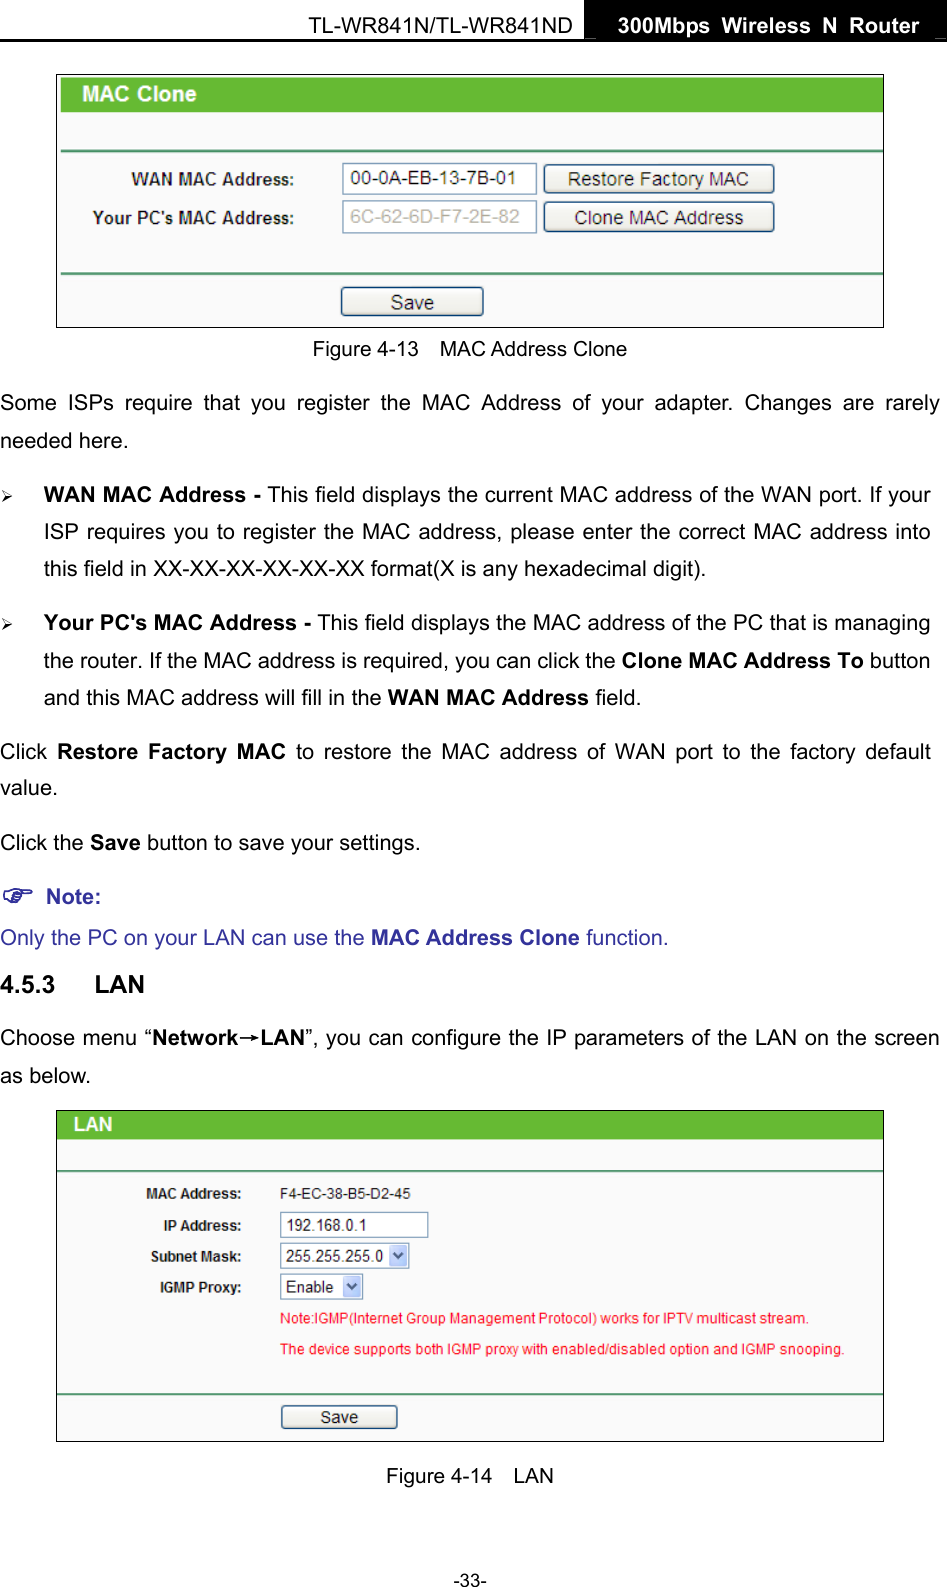   300Mbps Wireless N Router TL-WR841N/TL-WR841ND -33-  Figure 4-13  MAC Address Clone Some ISPs require that you register the MAC Address of your adapter. Changes are rarely needed here. ¾ WAN MAC Address - This field displays the current MAC address of the WAN port. If your ISP requires you to register the MAC address, please enter the correct MAC address into this field in XX-XX-XX-XX-XX-XX format(X is any hexadecimal digit).   ¾ Your PC&apos;s MAC Address - This field displays the MAC address of the PC that is managing the router. If the MAC address is required, you can click the Clone MAC Address To button and this MAC address will fill in the WAN MAC Address field. Click  Restore Factory MAC to restore the MAC address of WAN port to the factory default value. Click the Save button to save your settings. ) Note:  Only the PC on your LAN can use the MAC Address Clone function. 4.5.3  LAN Choose menu “Network→LAN”, you can configure the IP parameters of the LAN on the screen as below.  Figure 4-14  LAN 